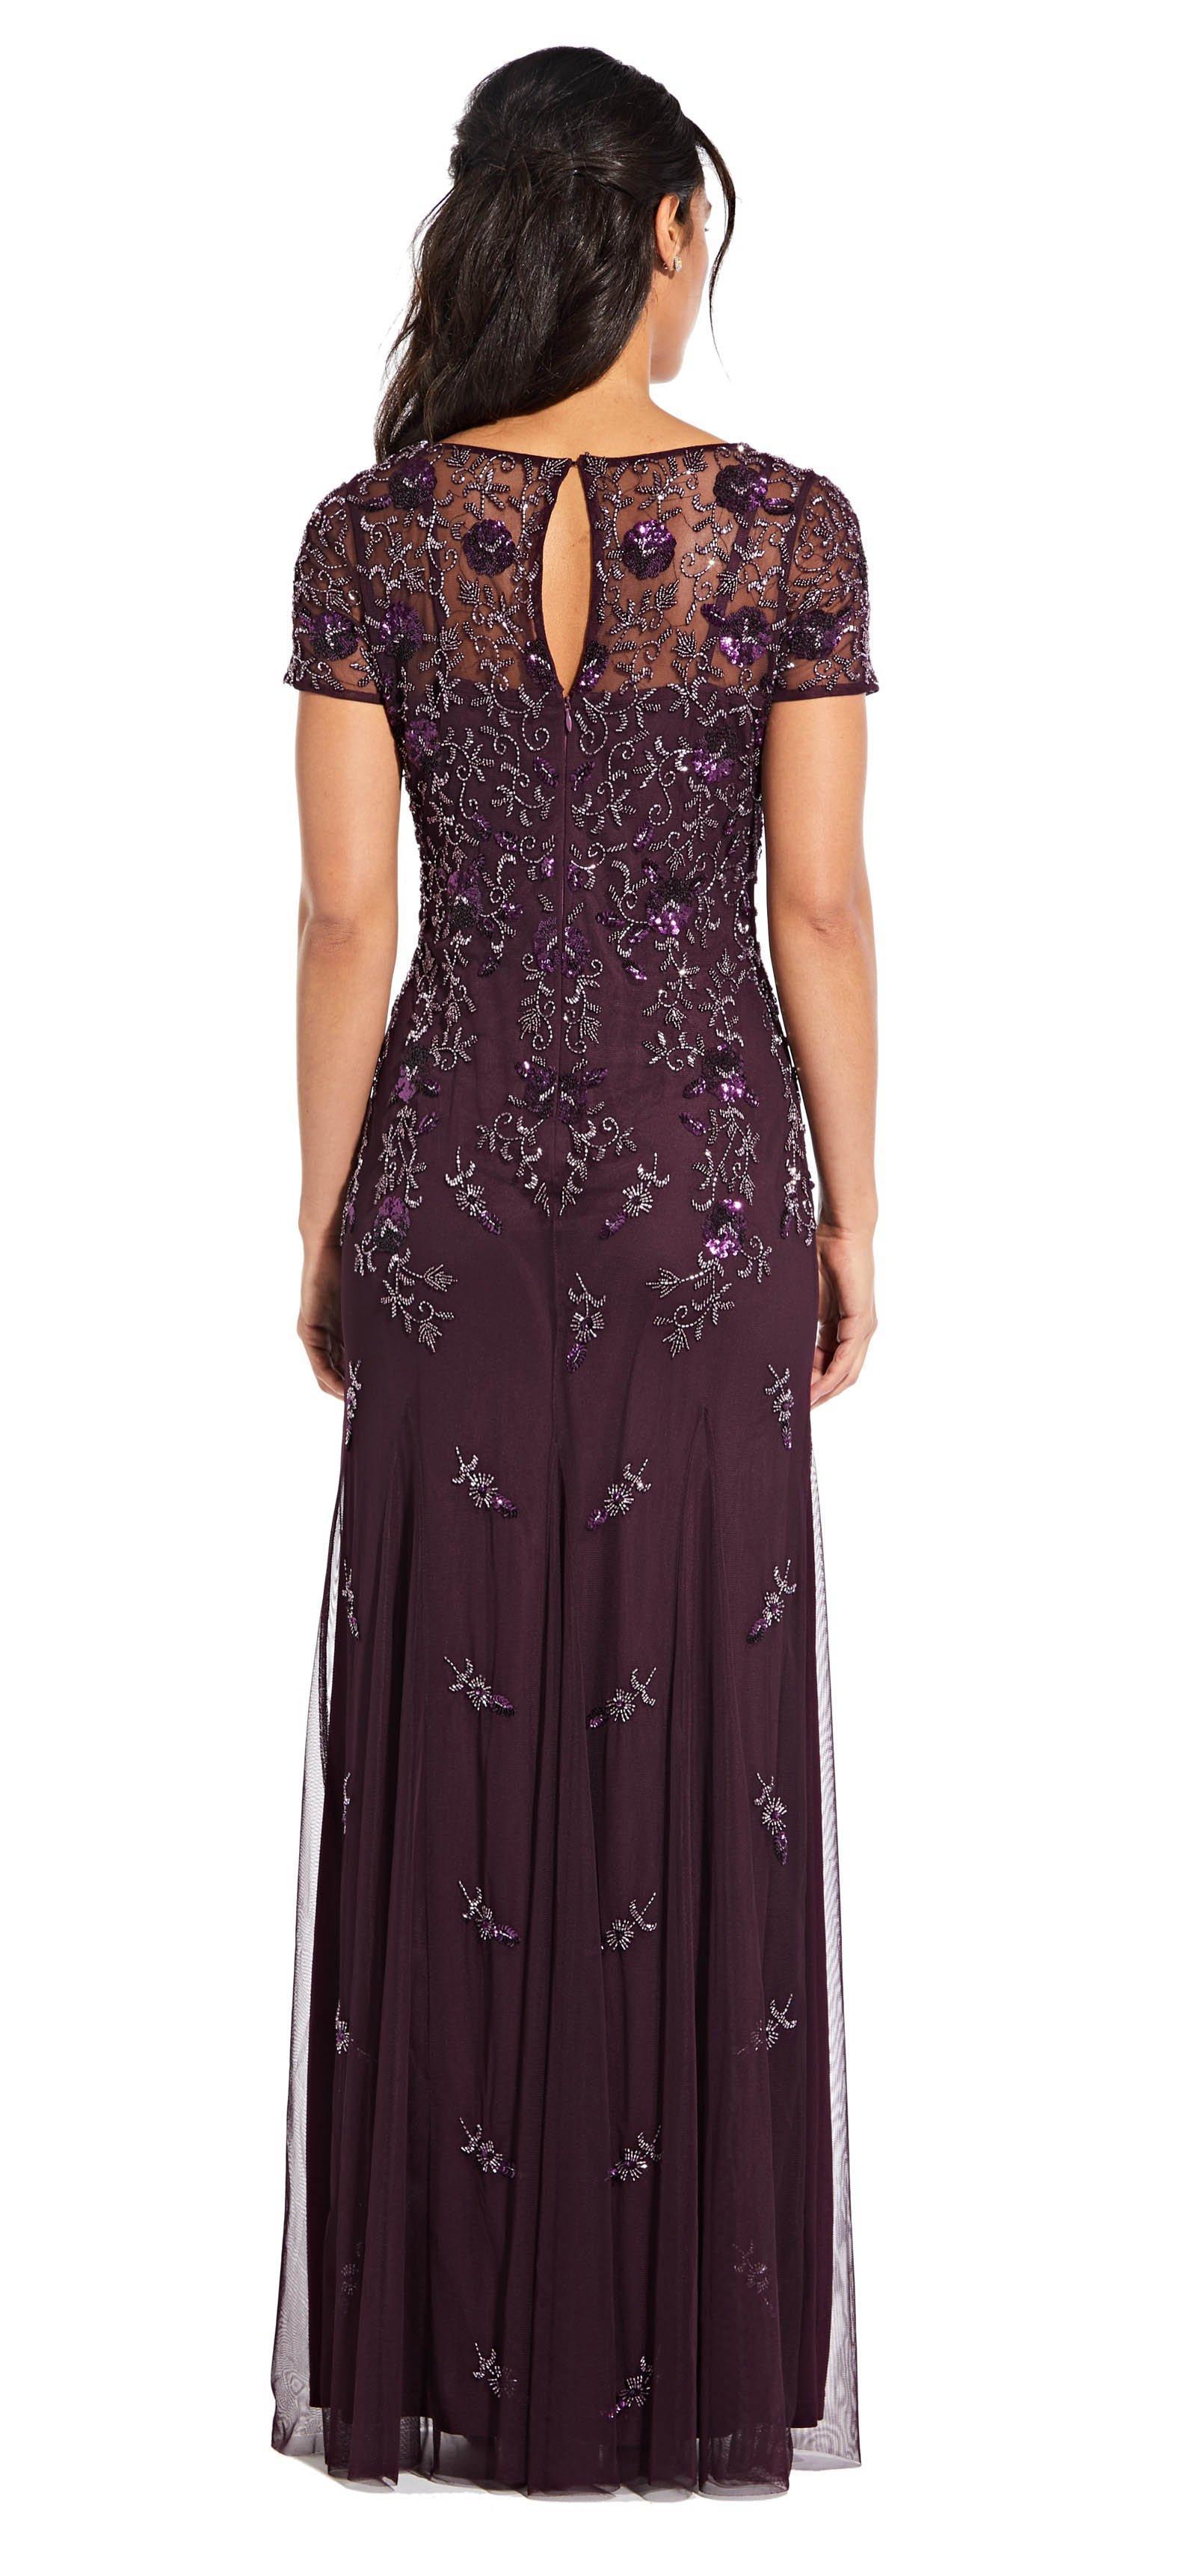 Adrianna Papell Ap1e203711 Floral Beaded Evening Dress in Purple - Lyst